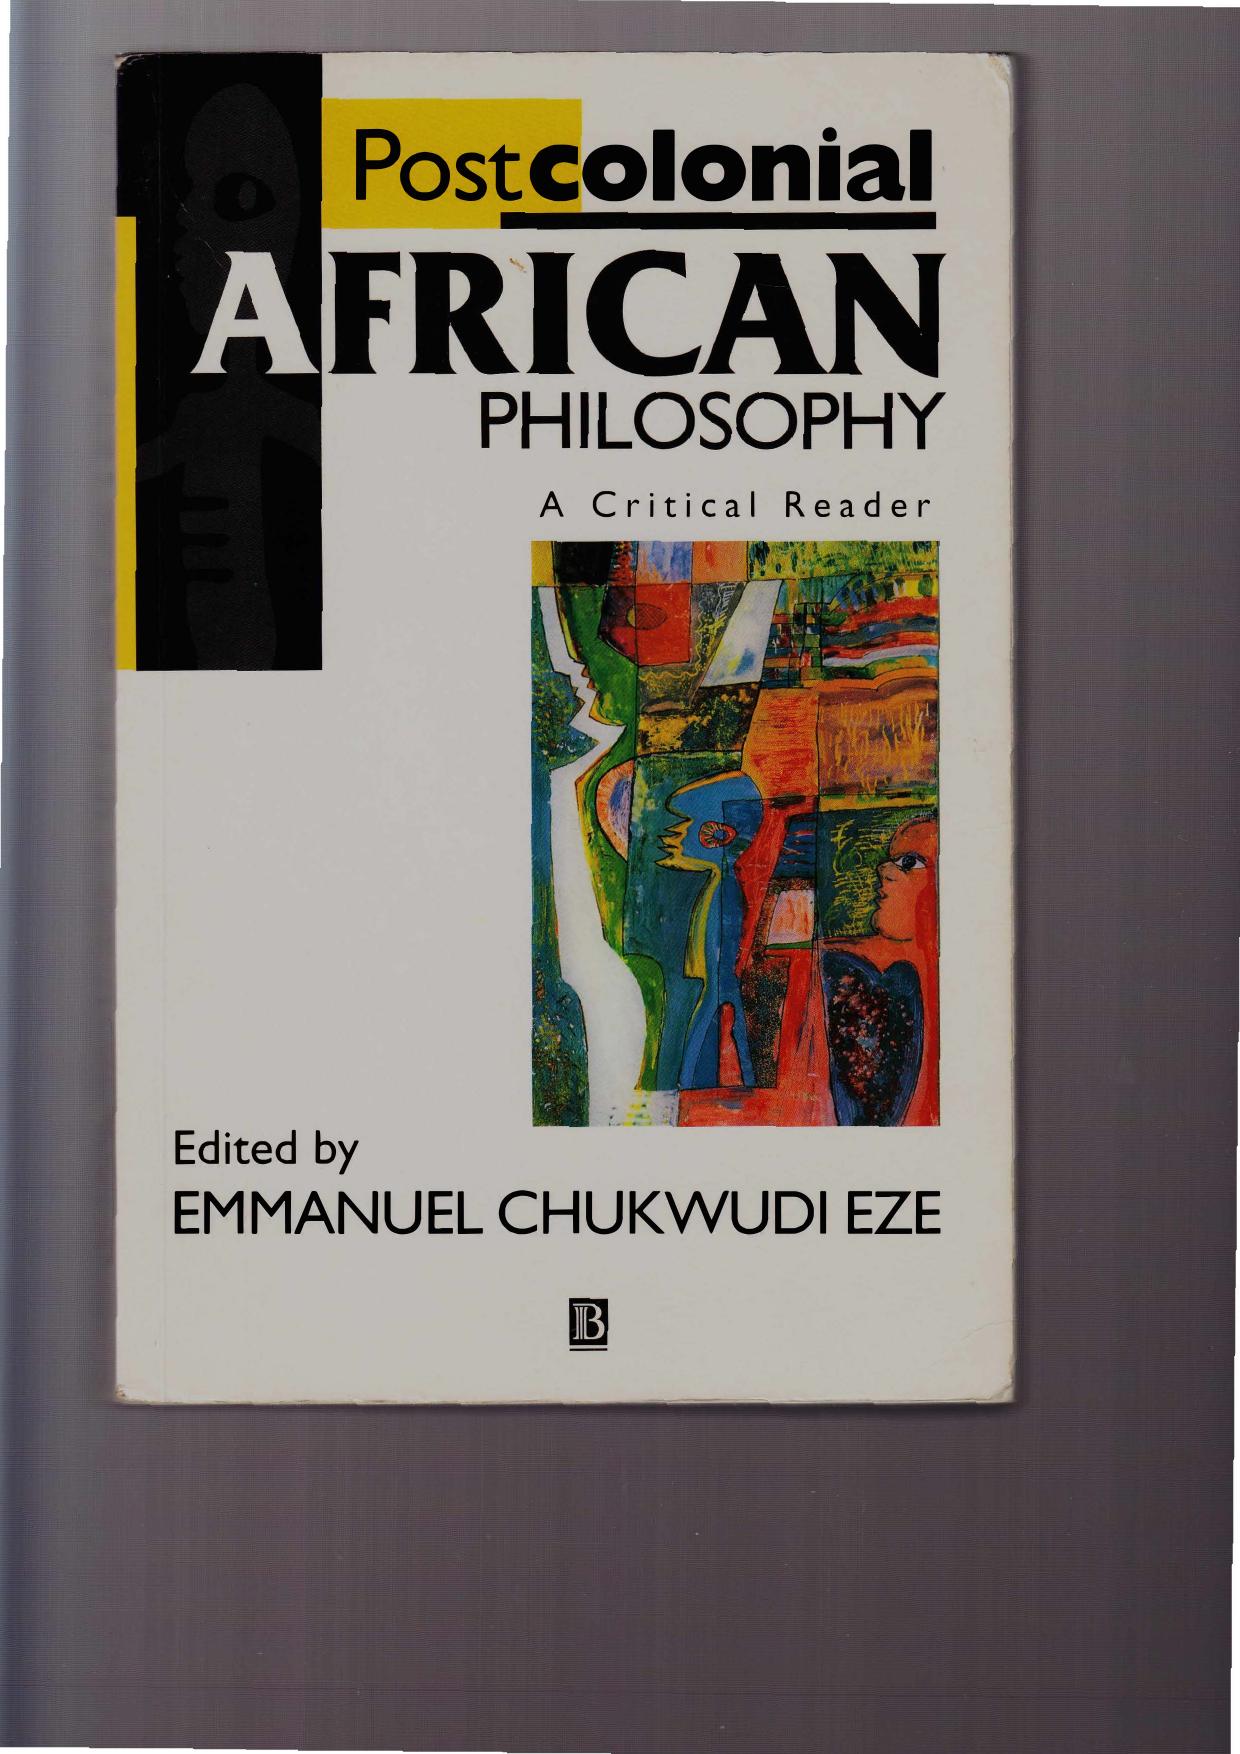 Postcolonial African Philosophy: A Critical Reader